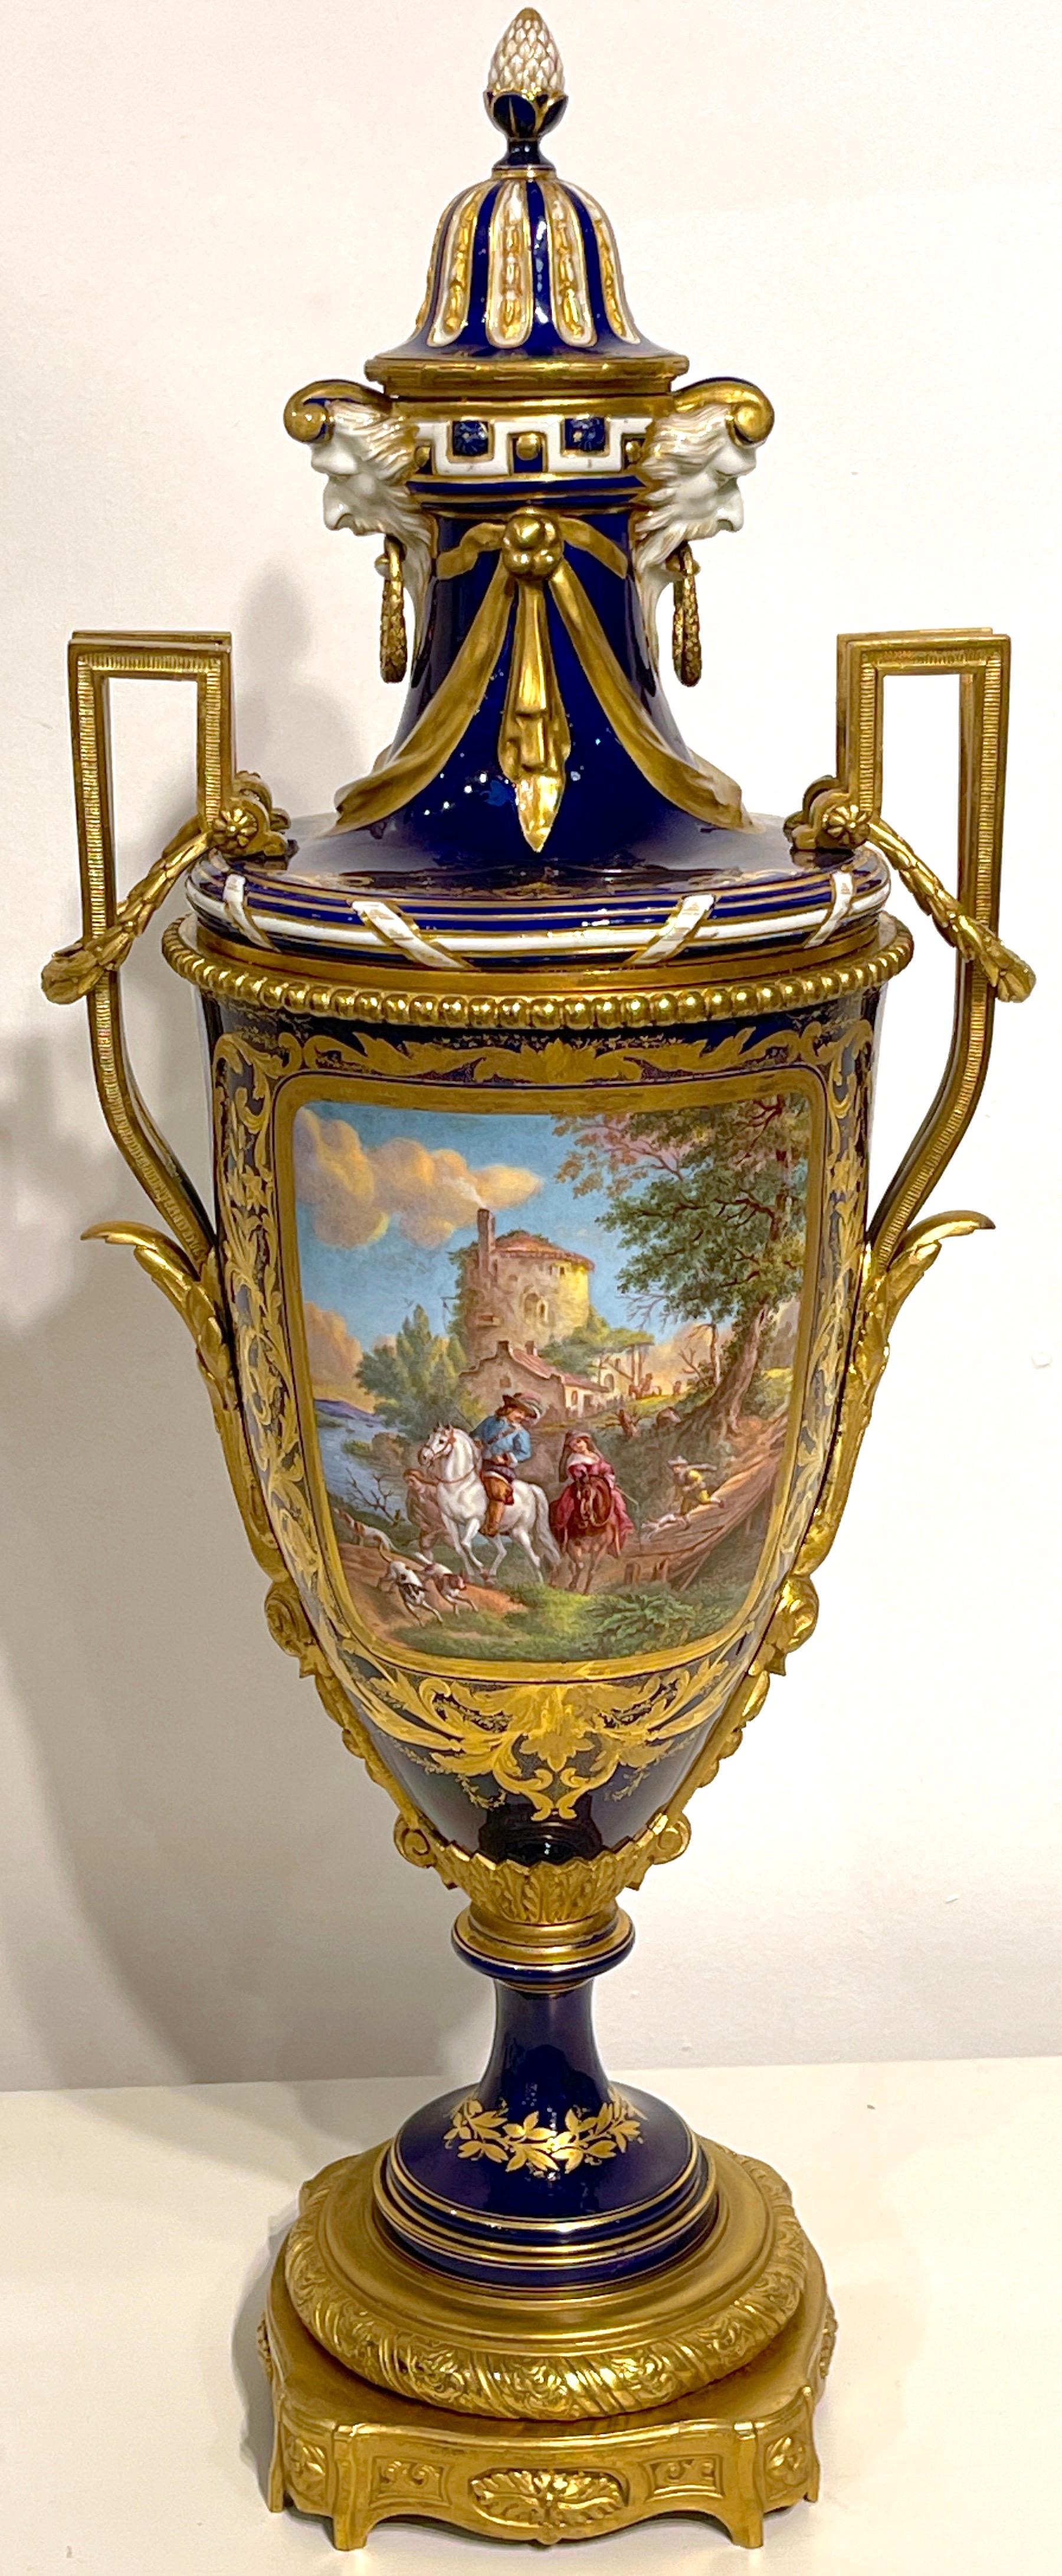 19th century Sevres Cobalt & Ormolu Louis XIII Hunt scene vase & cover 
France, circa 1880-1900
Standing 32-Inches high, this magnificent highly detailed porcelain urn complete with its original acanthus motif gilt lid. The lid is marked with blue